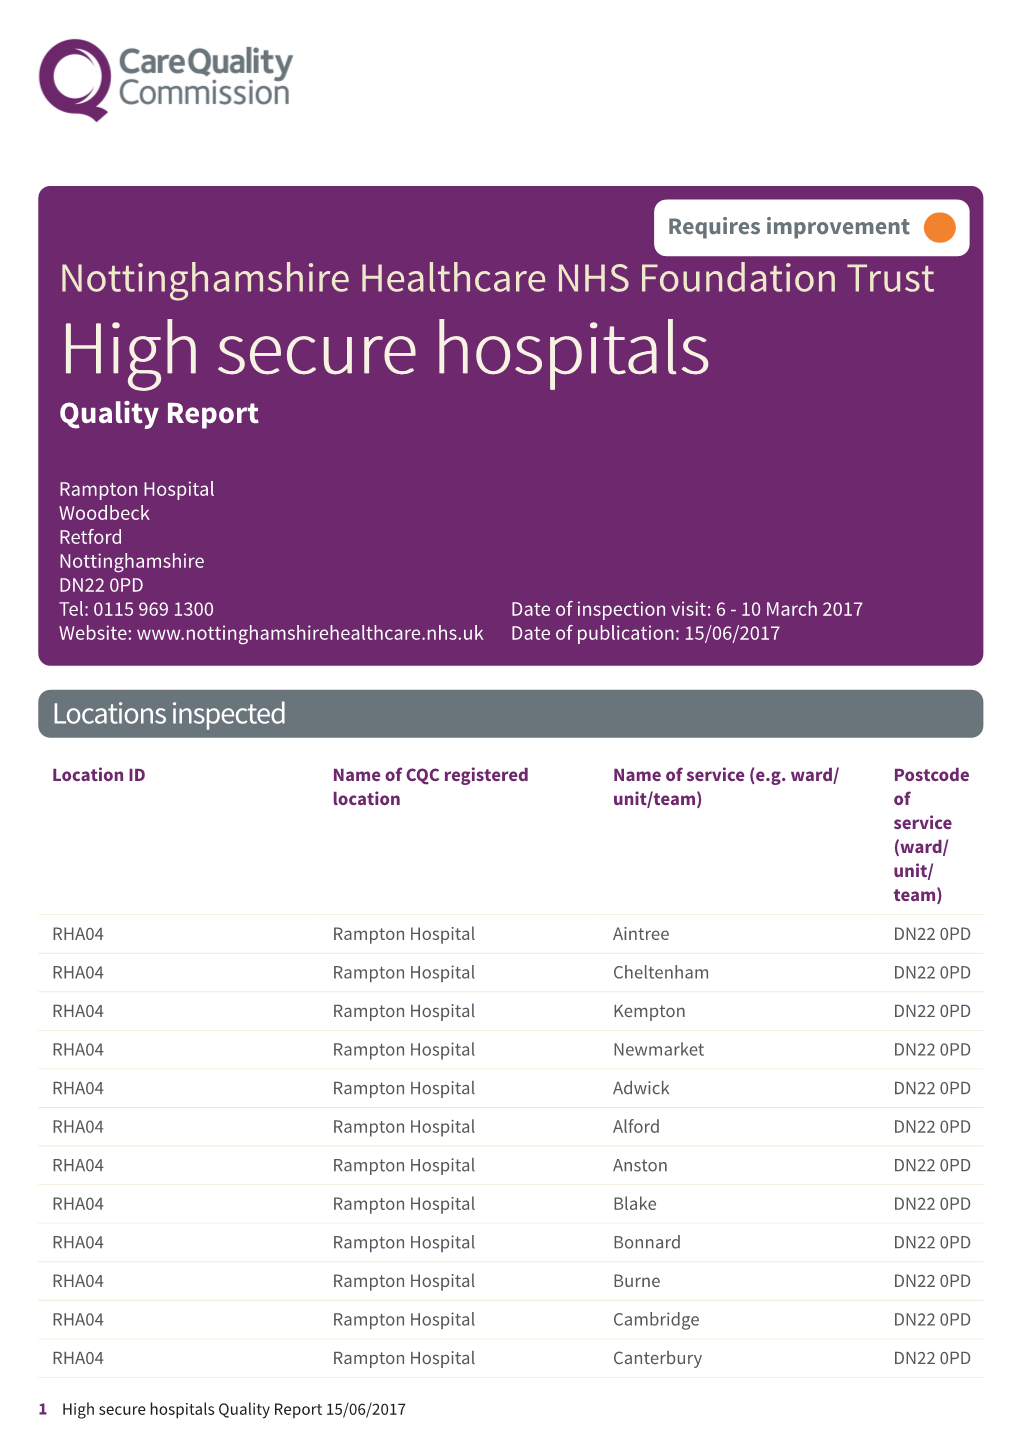 Nottinghamshire Healthcare NHS Foundation Trust High Secure Hospitals Quality Report